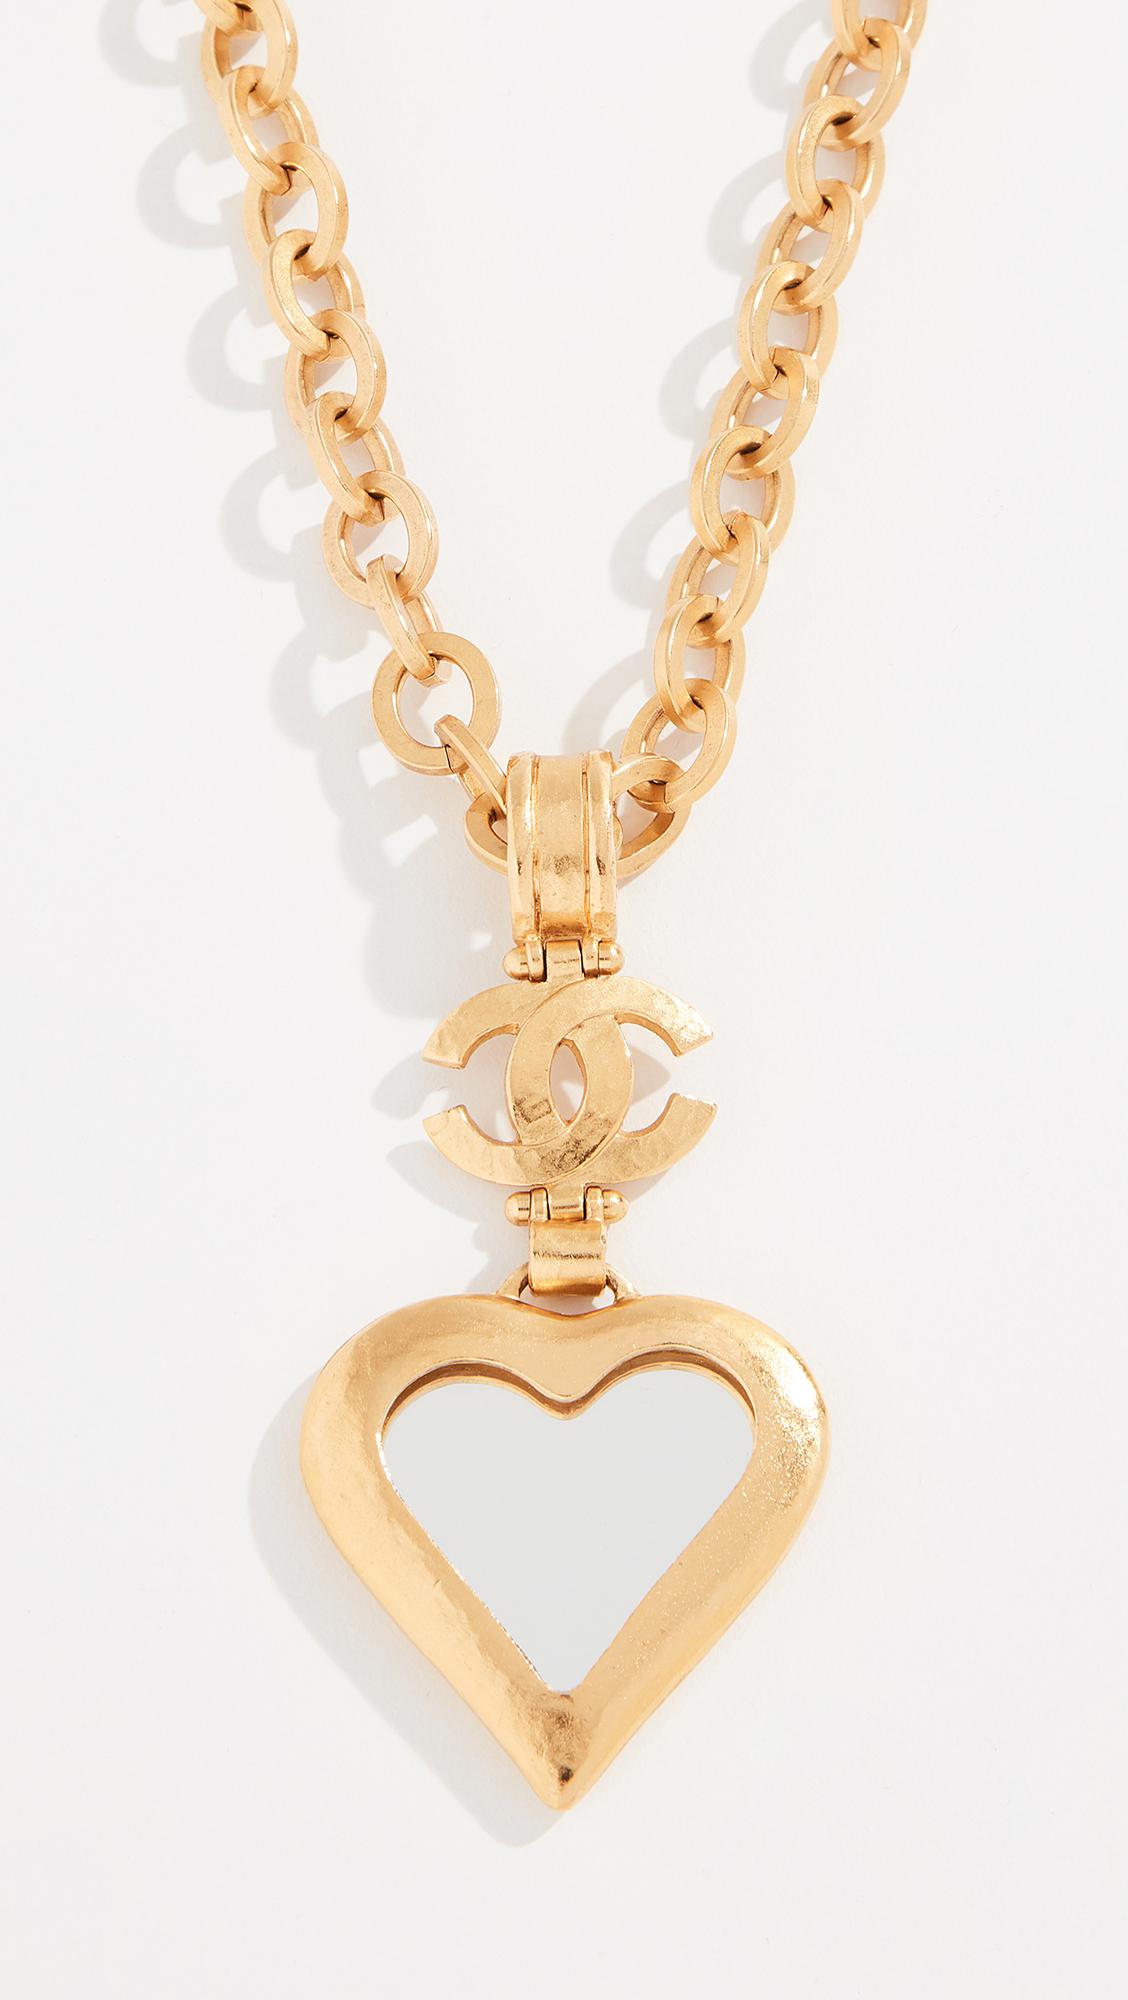 What Goes Around Comes Around Chanel Heart Mirror Necklace in Metallic